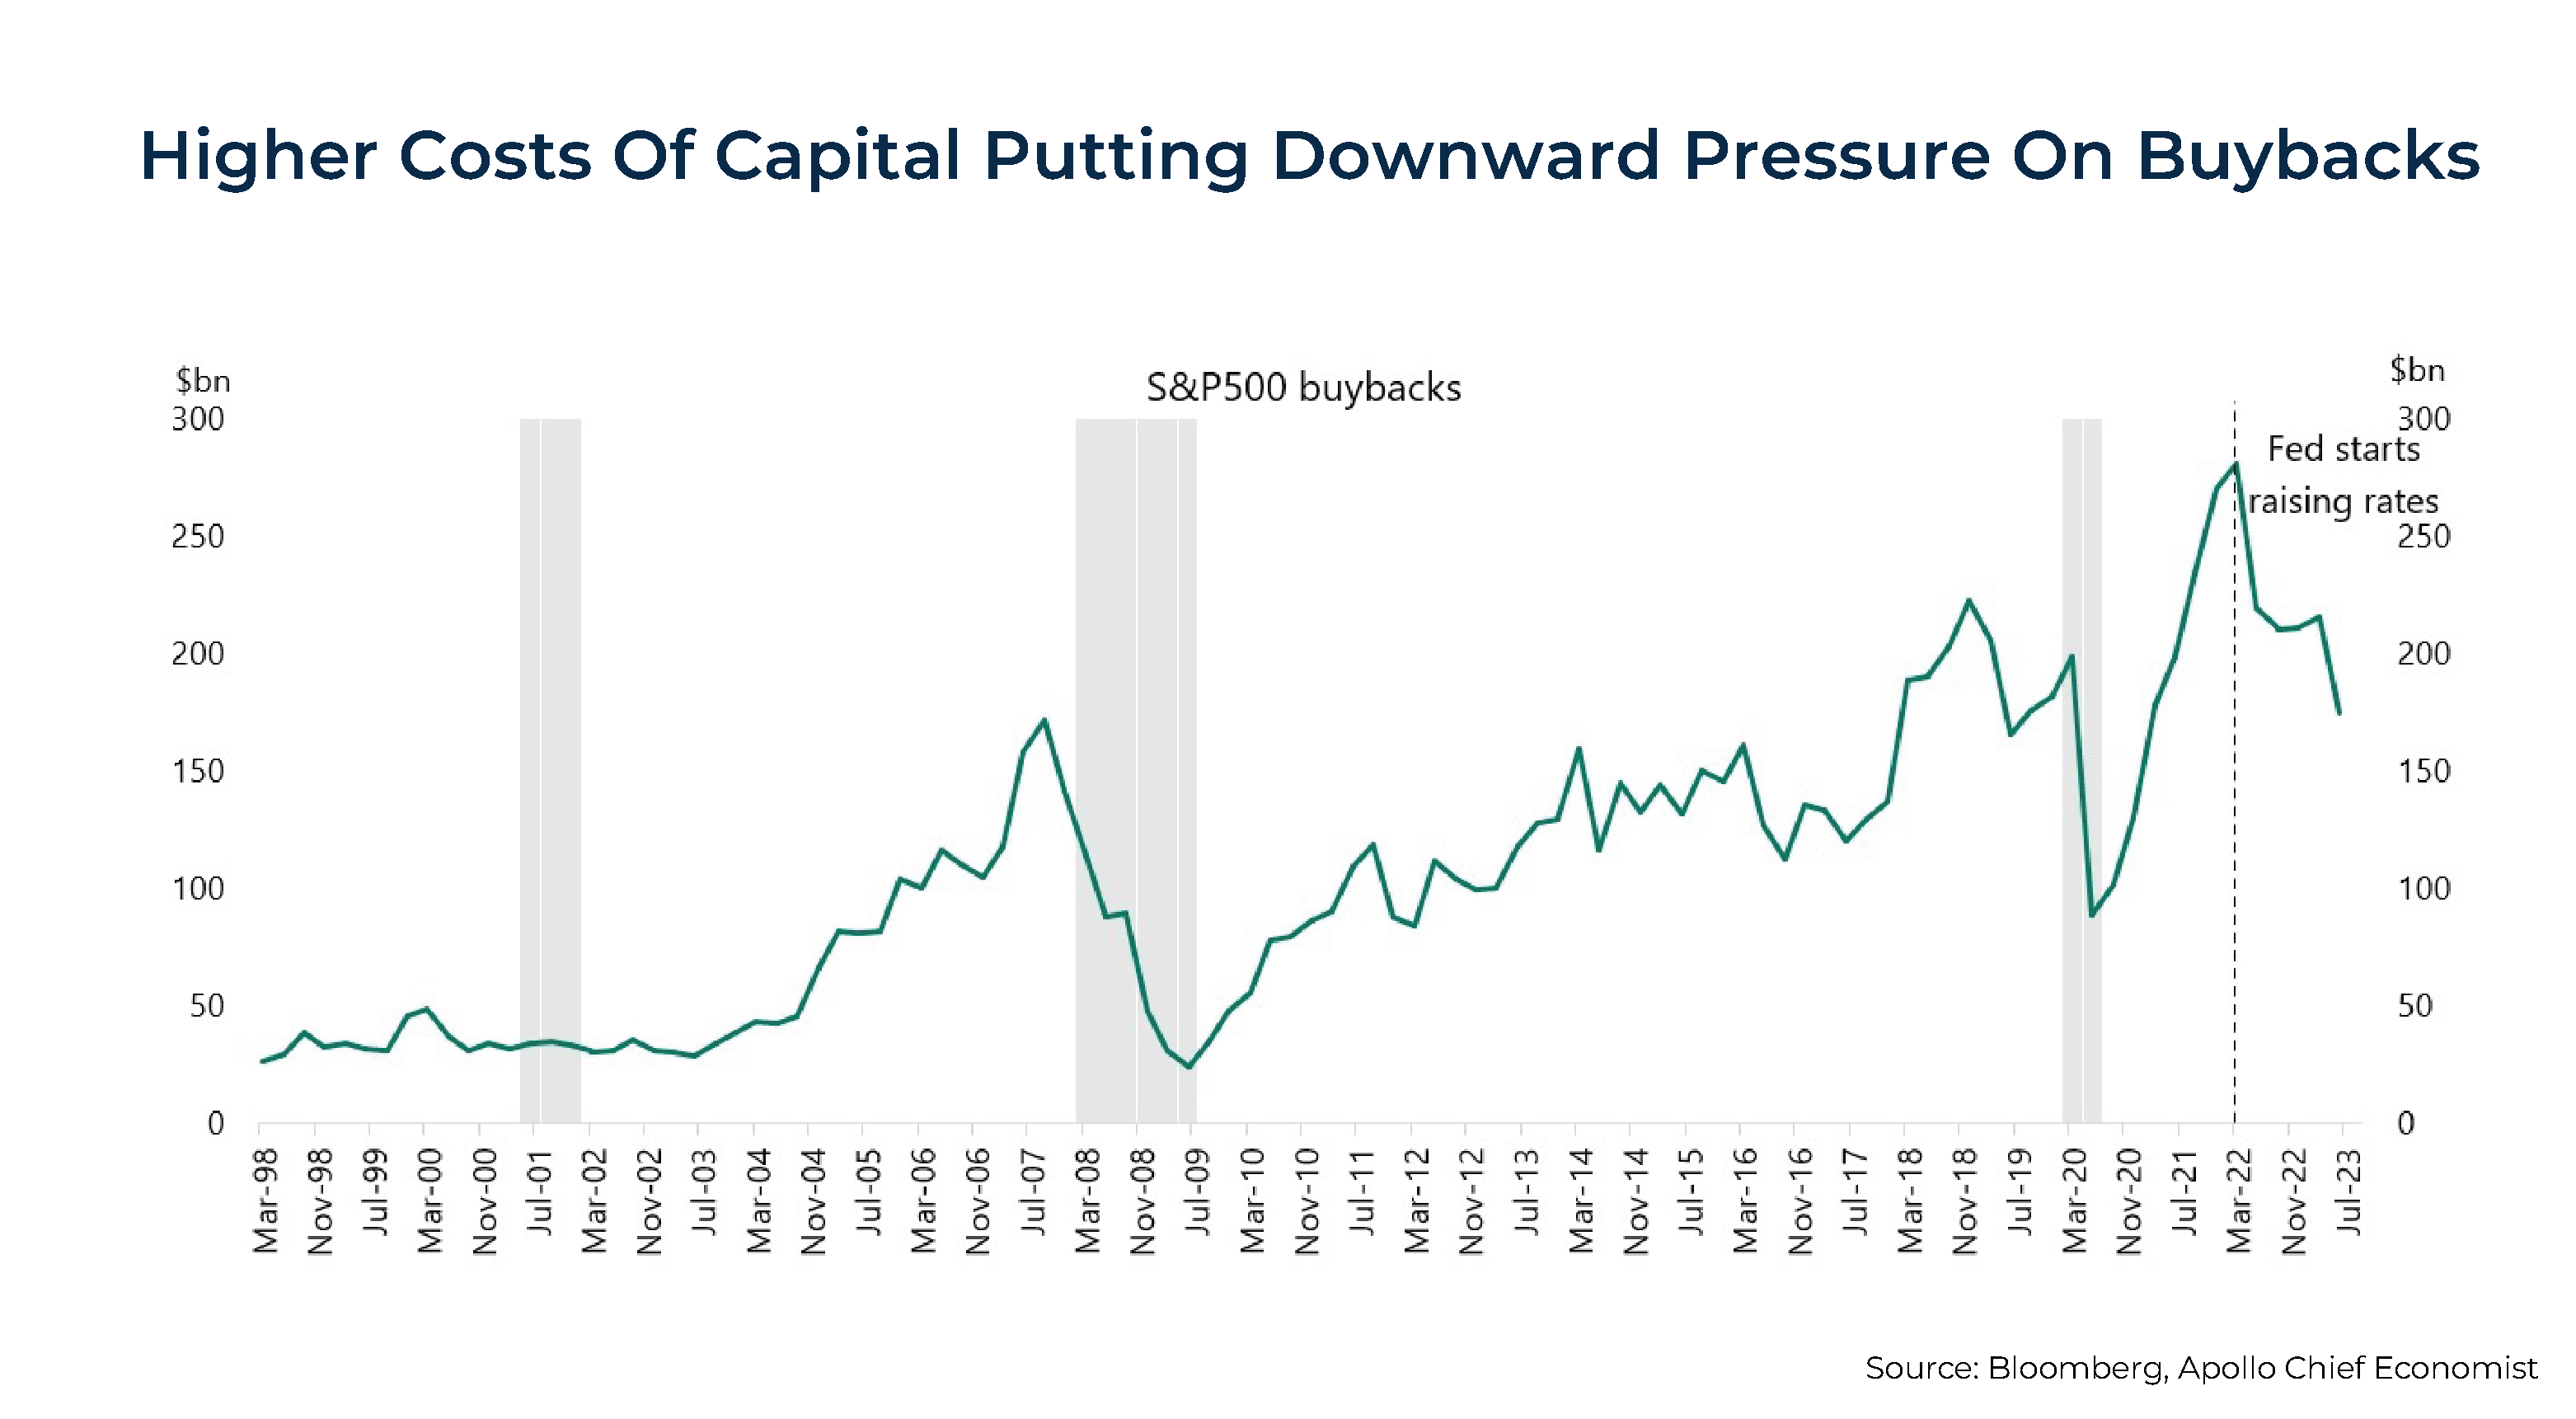 Higher Costs Of Capital Putting Downward Pressure On Buybacks